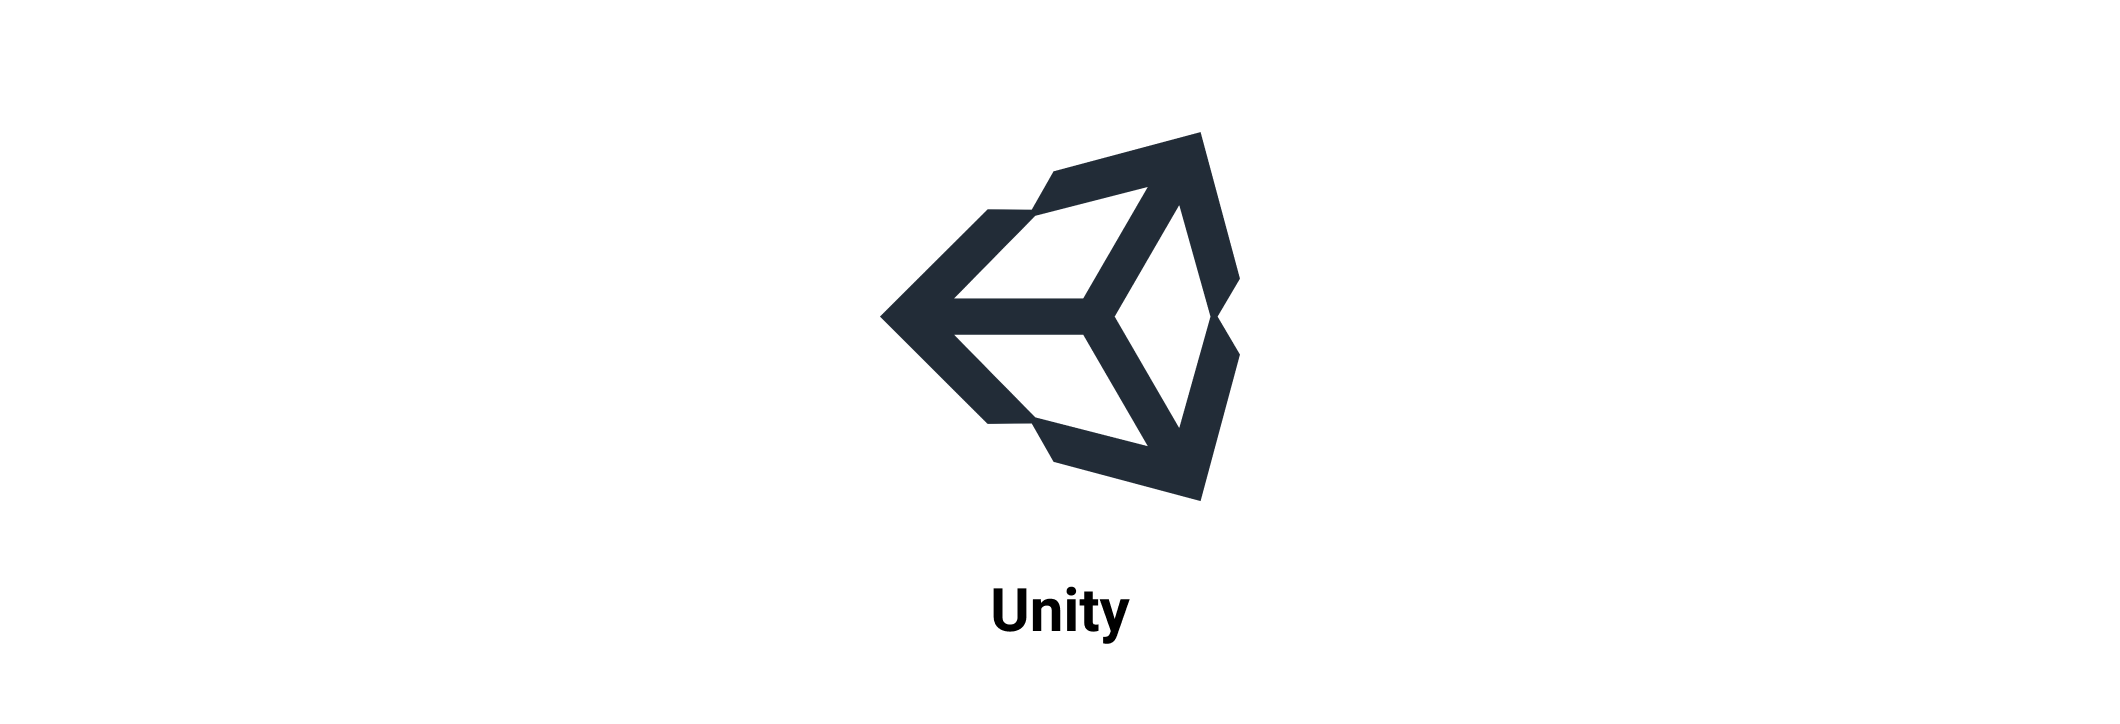 Best Android Development Tools Unity